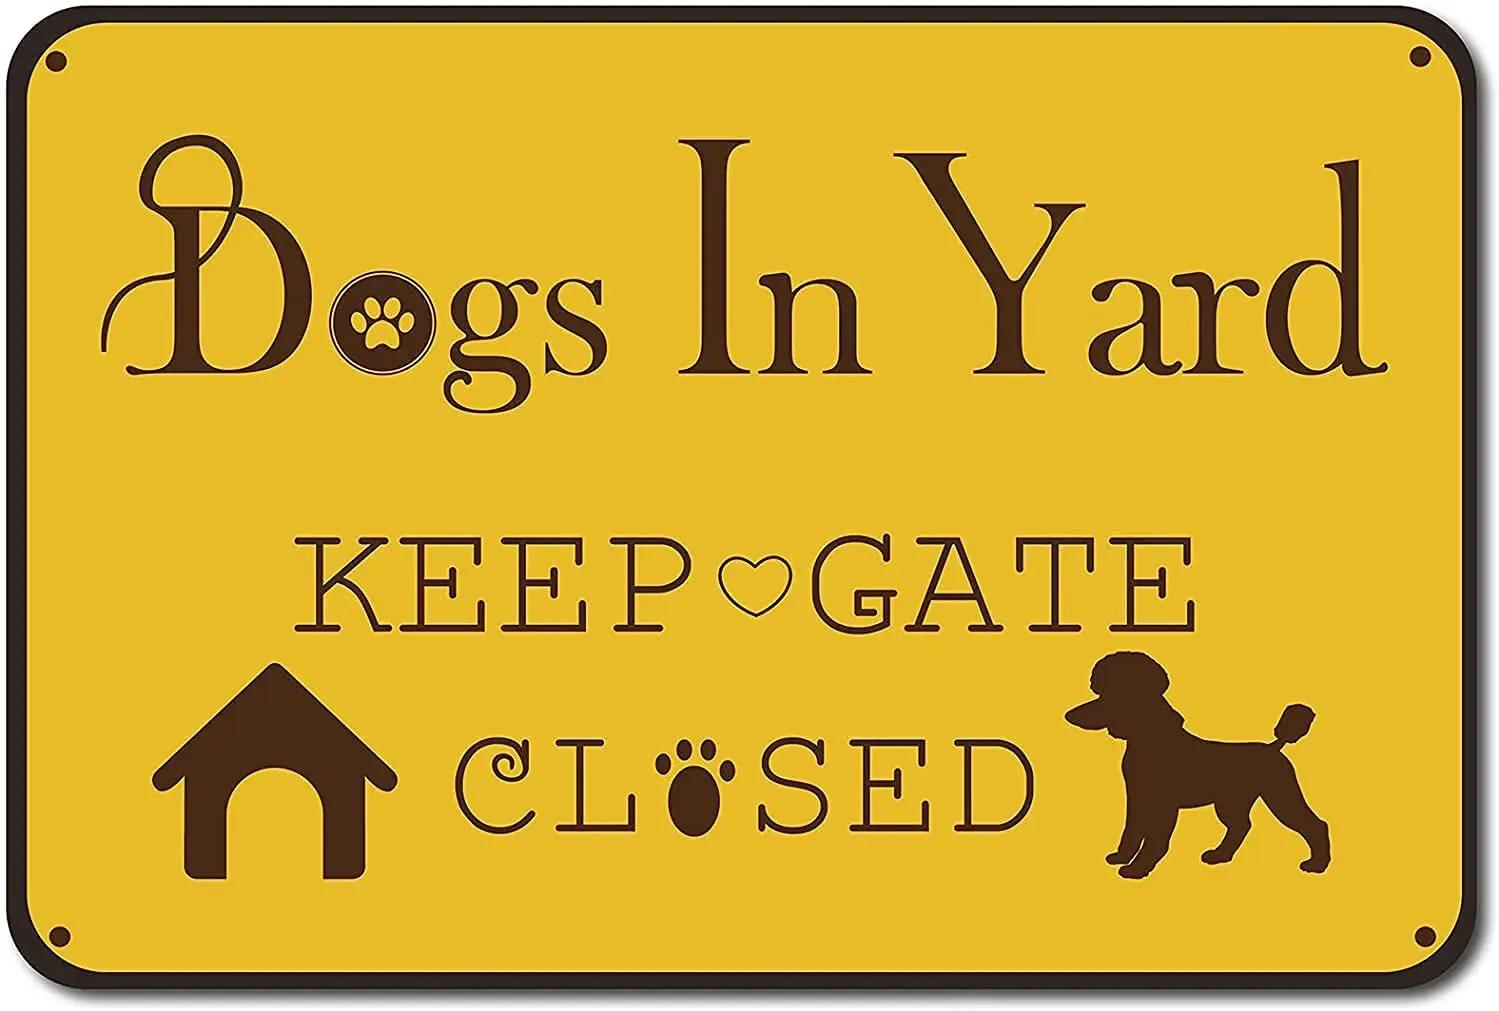 

Licpact Metal Decoration Sign Dogs in Yard Keep Gate Closed Indoor Home Wall Decoration Poster Metal Plaque 8x12 Inches